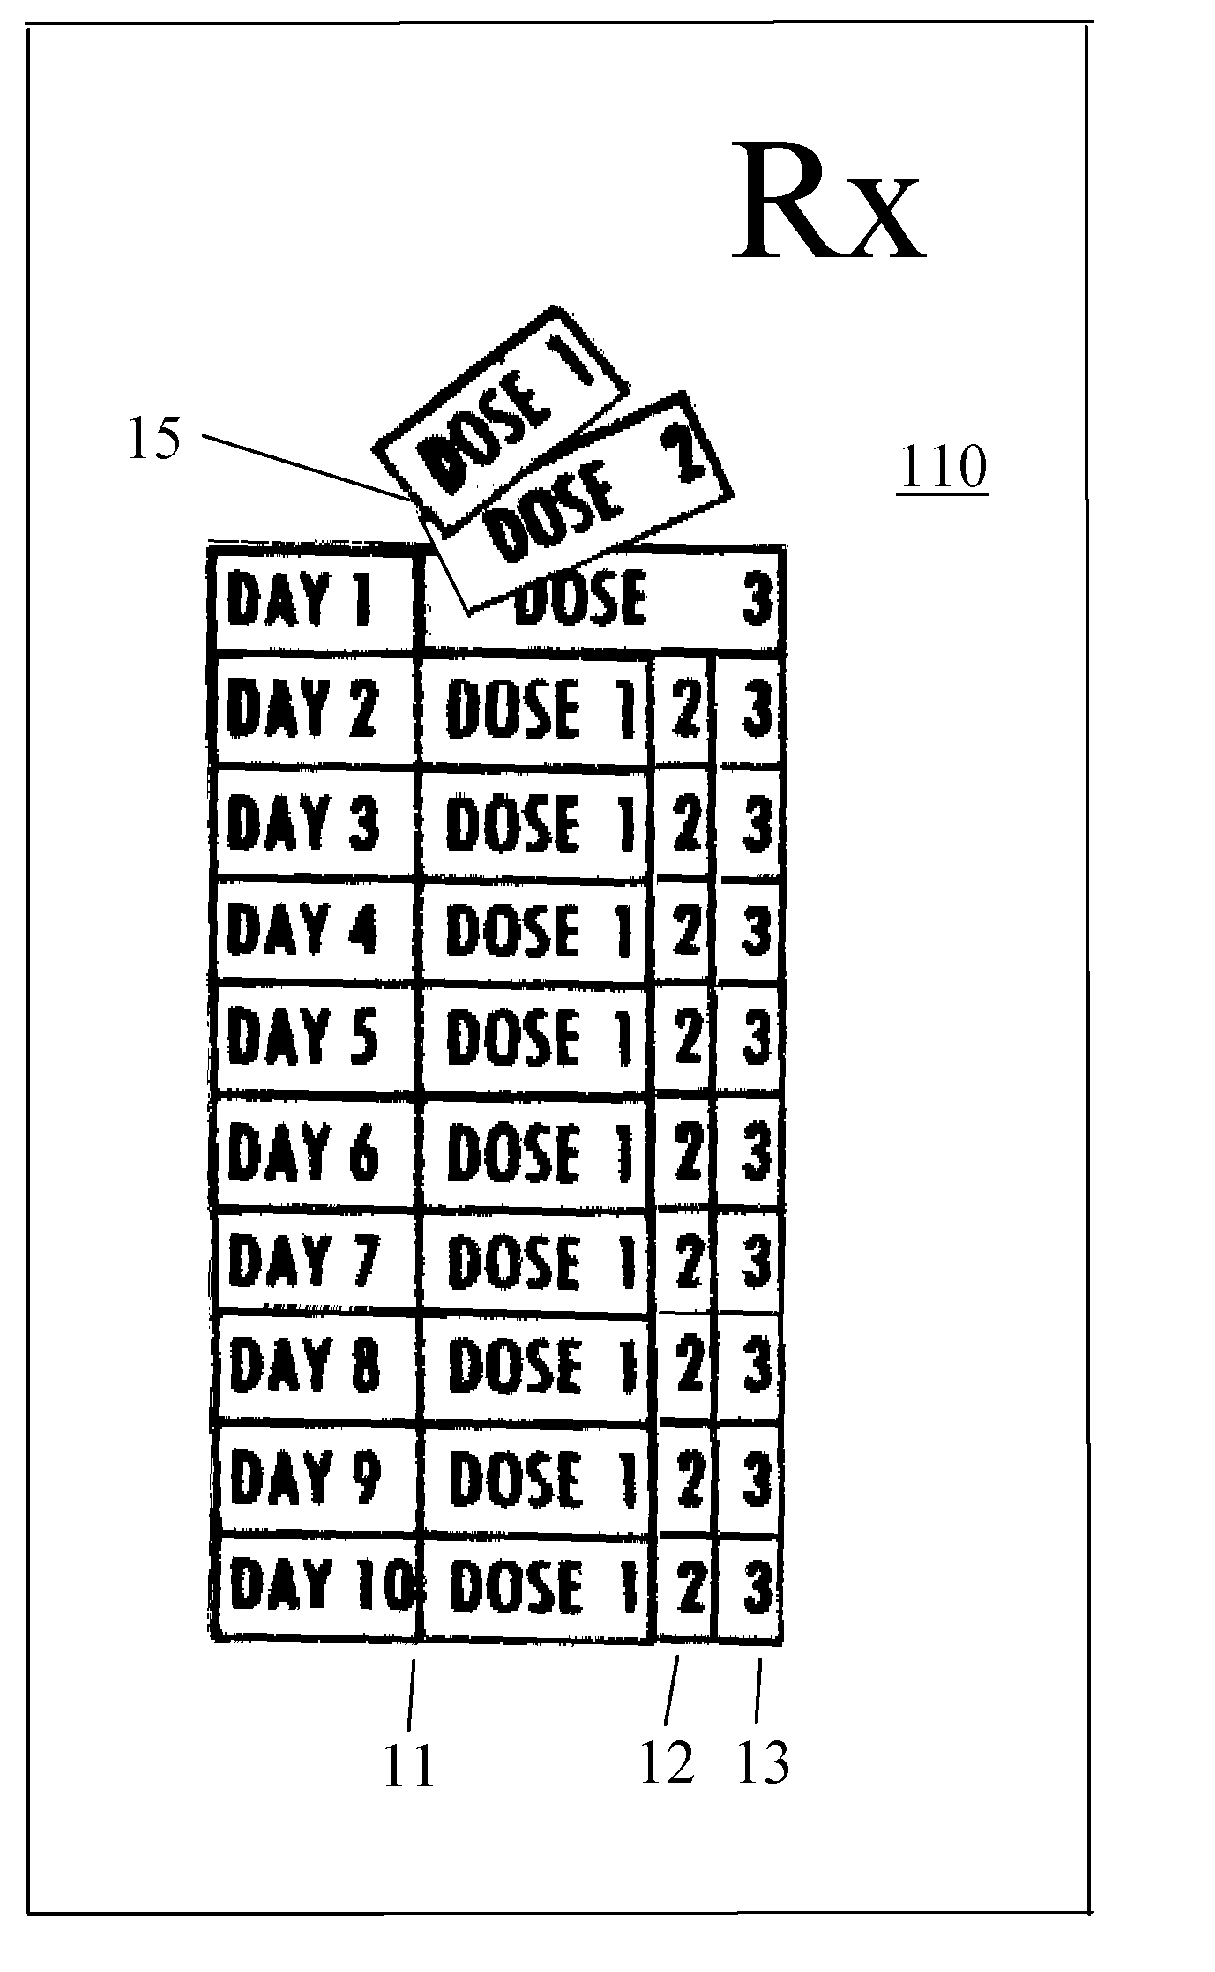 Medication Dosage Reminder and Confirmation Device, System, Method, and Product-by-Process